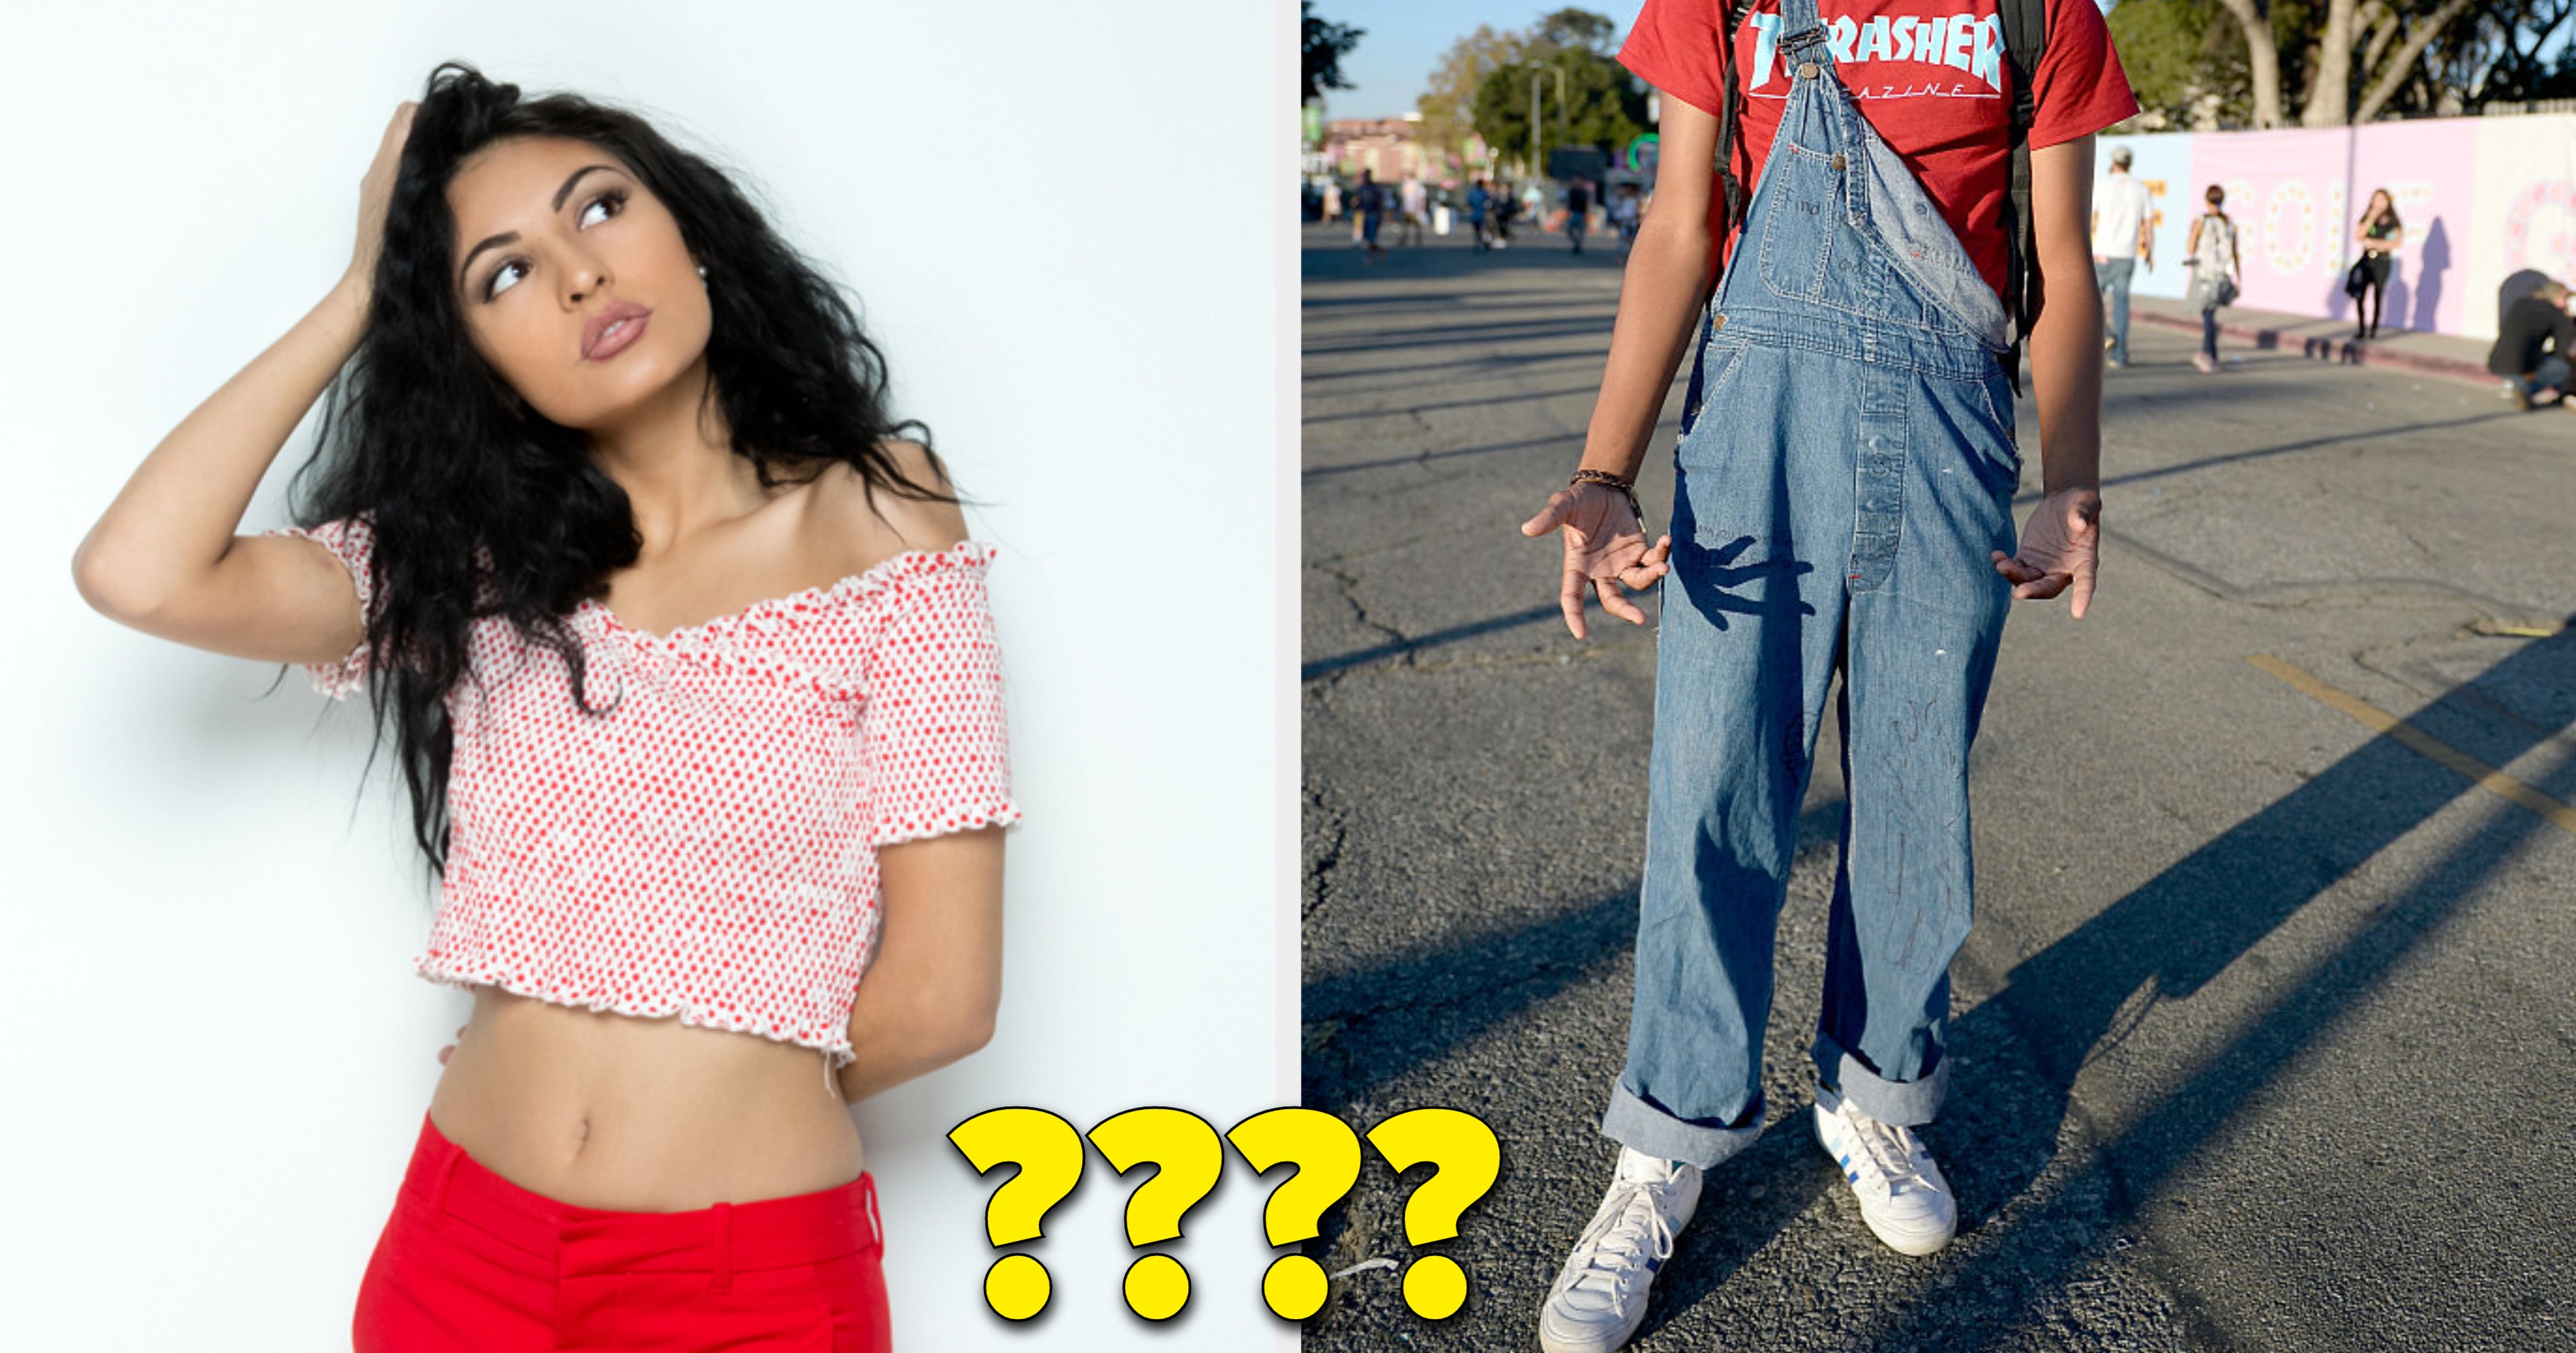 Gen Z vs. Millennial outfits 👯‍♀️ Which is more like your style